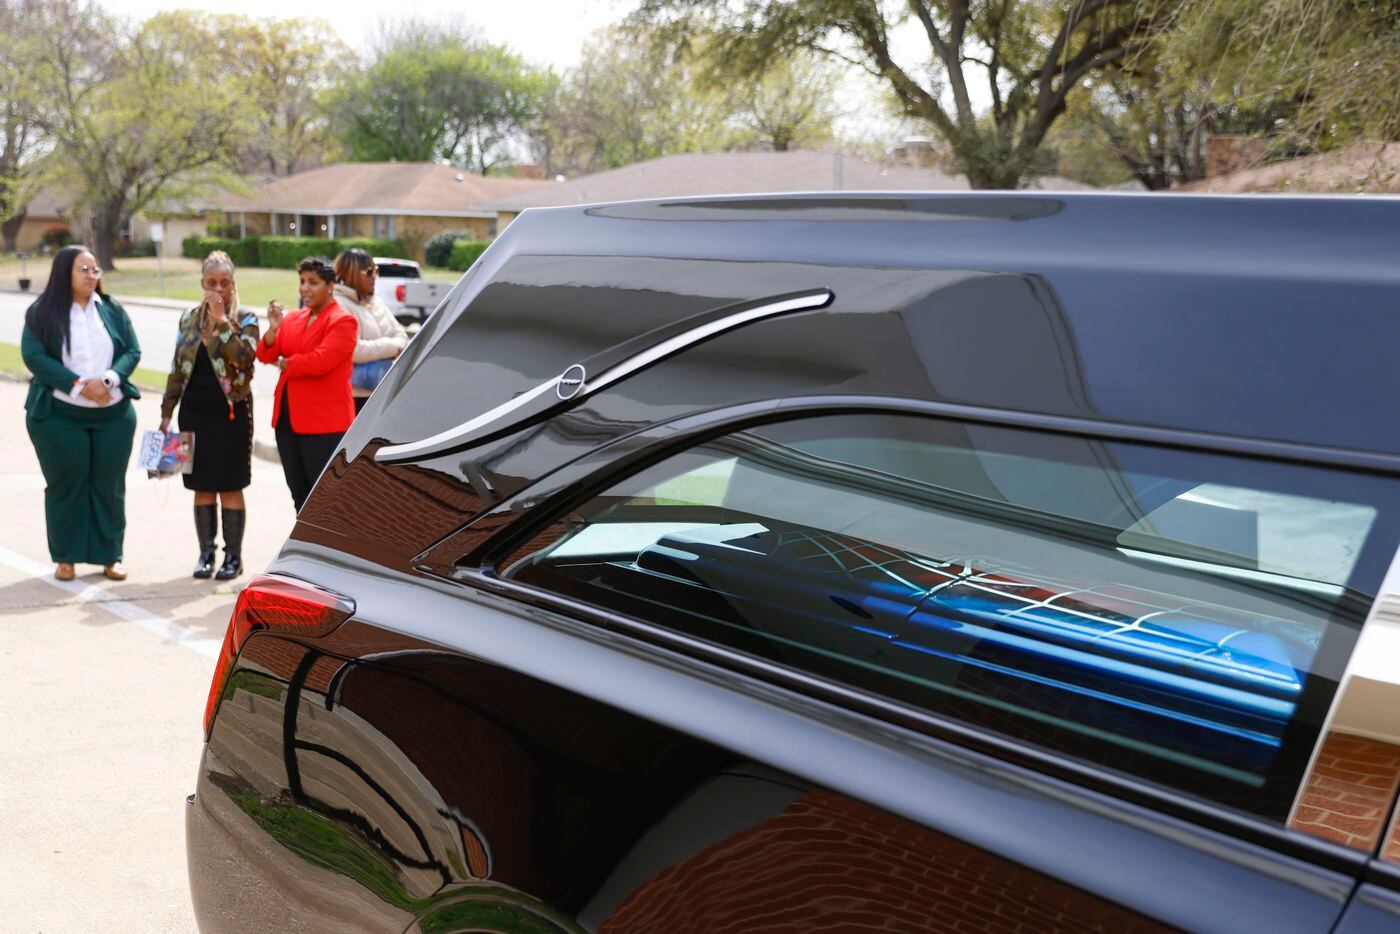 The casket of the late Legend Chappell remains in the hearse after a funeral service on...